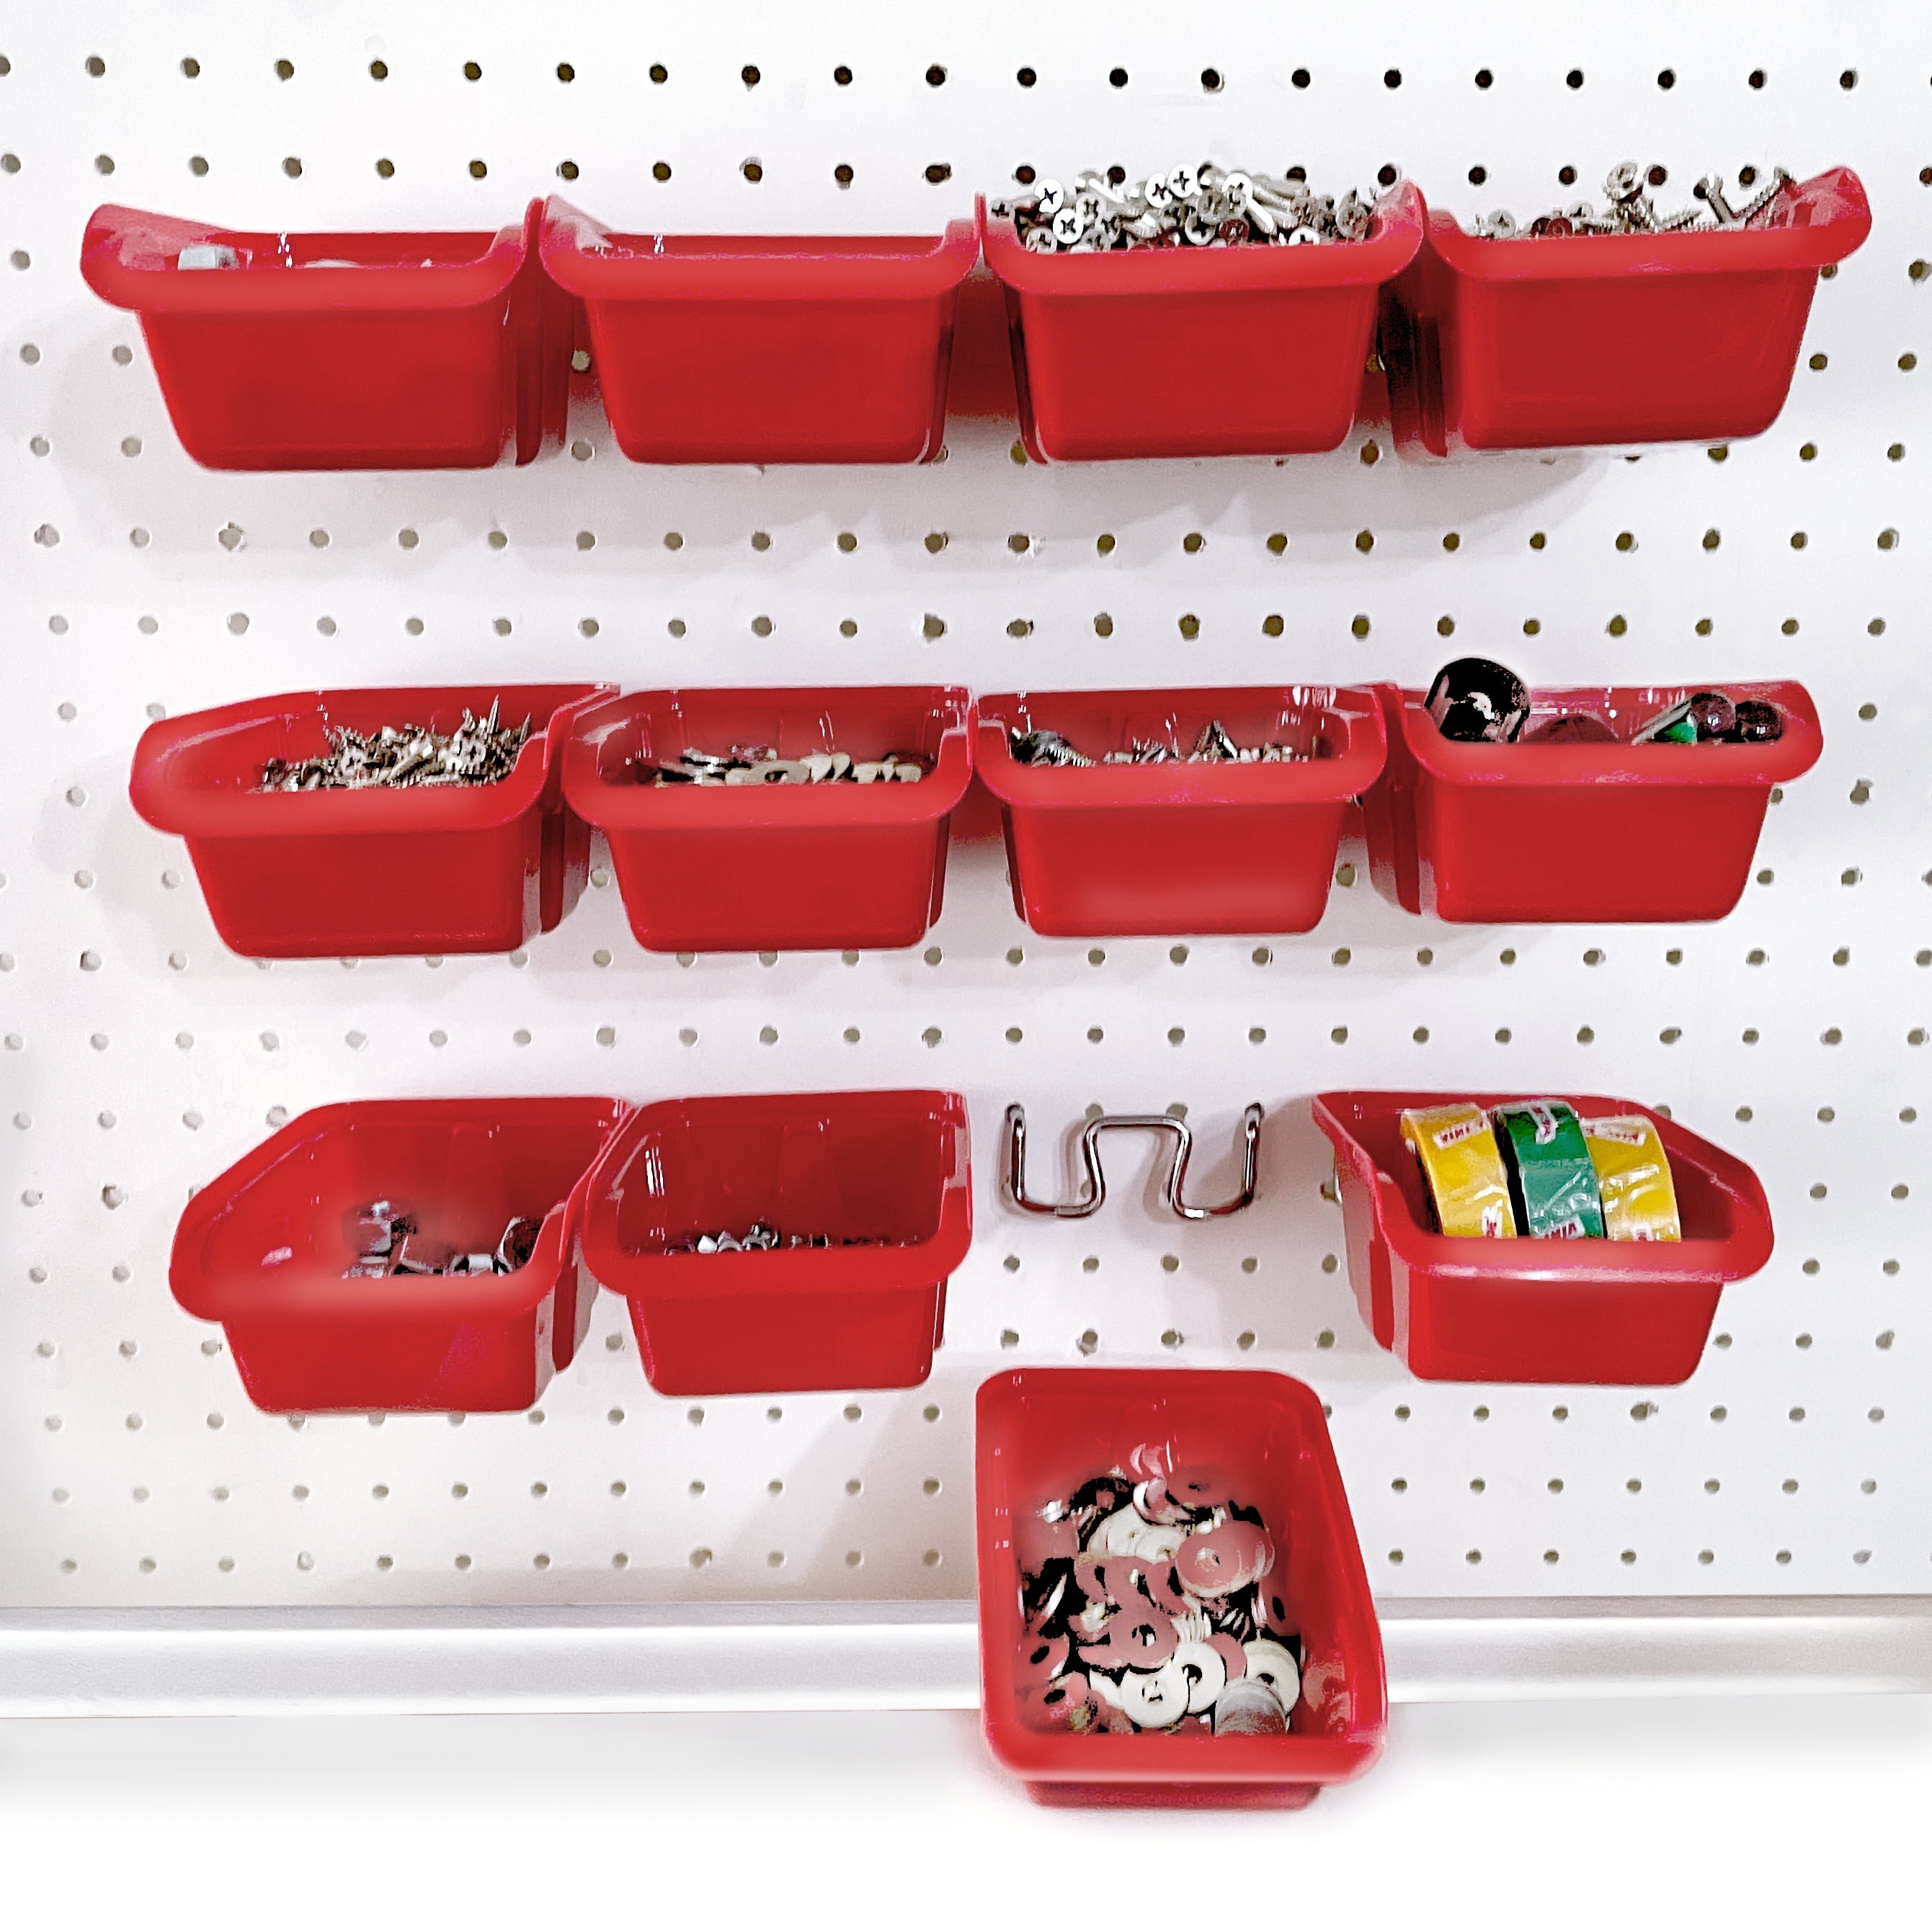 Buttons Bolts Beads Todeco Wall Mounted Storage Bins Set with 28 Garage Organization Bins Screws 16 Tool Organizers Accessories & 2 Pegboard for your Nuts Nails Other Small Parts